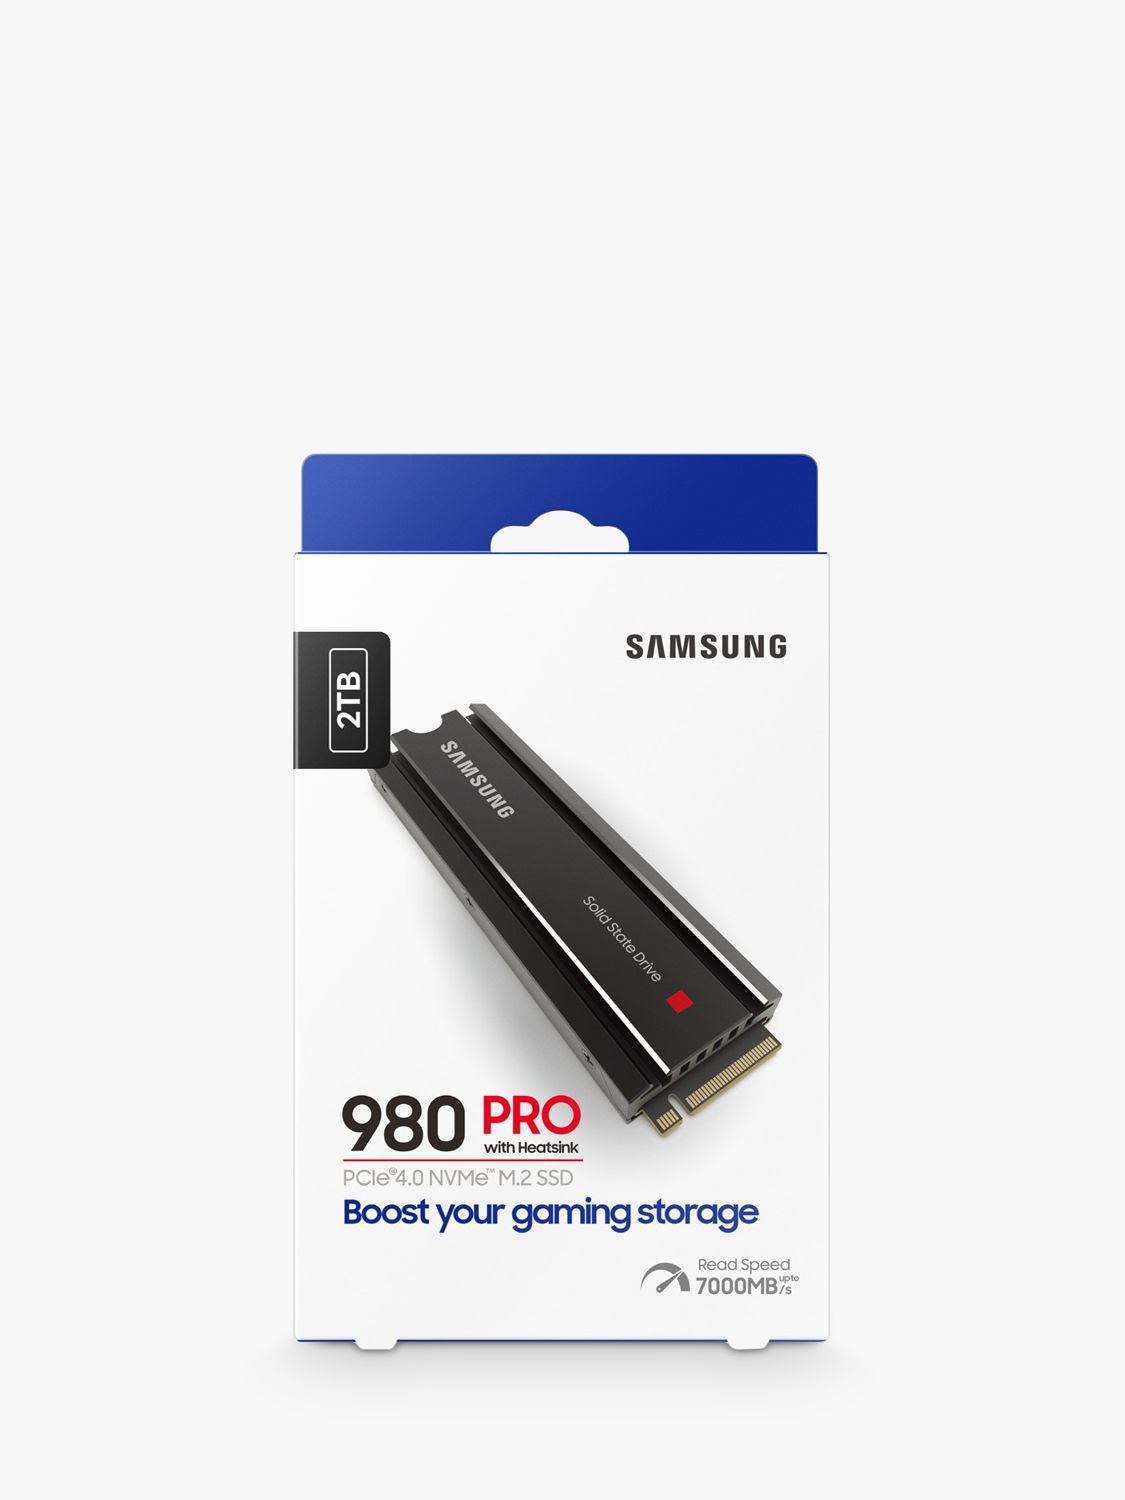 Samsung 980 PRO, PCIe 4.0 m.2 SSD with Heatsink for PS5 & PC, 2TB